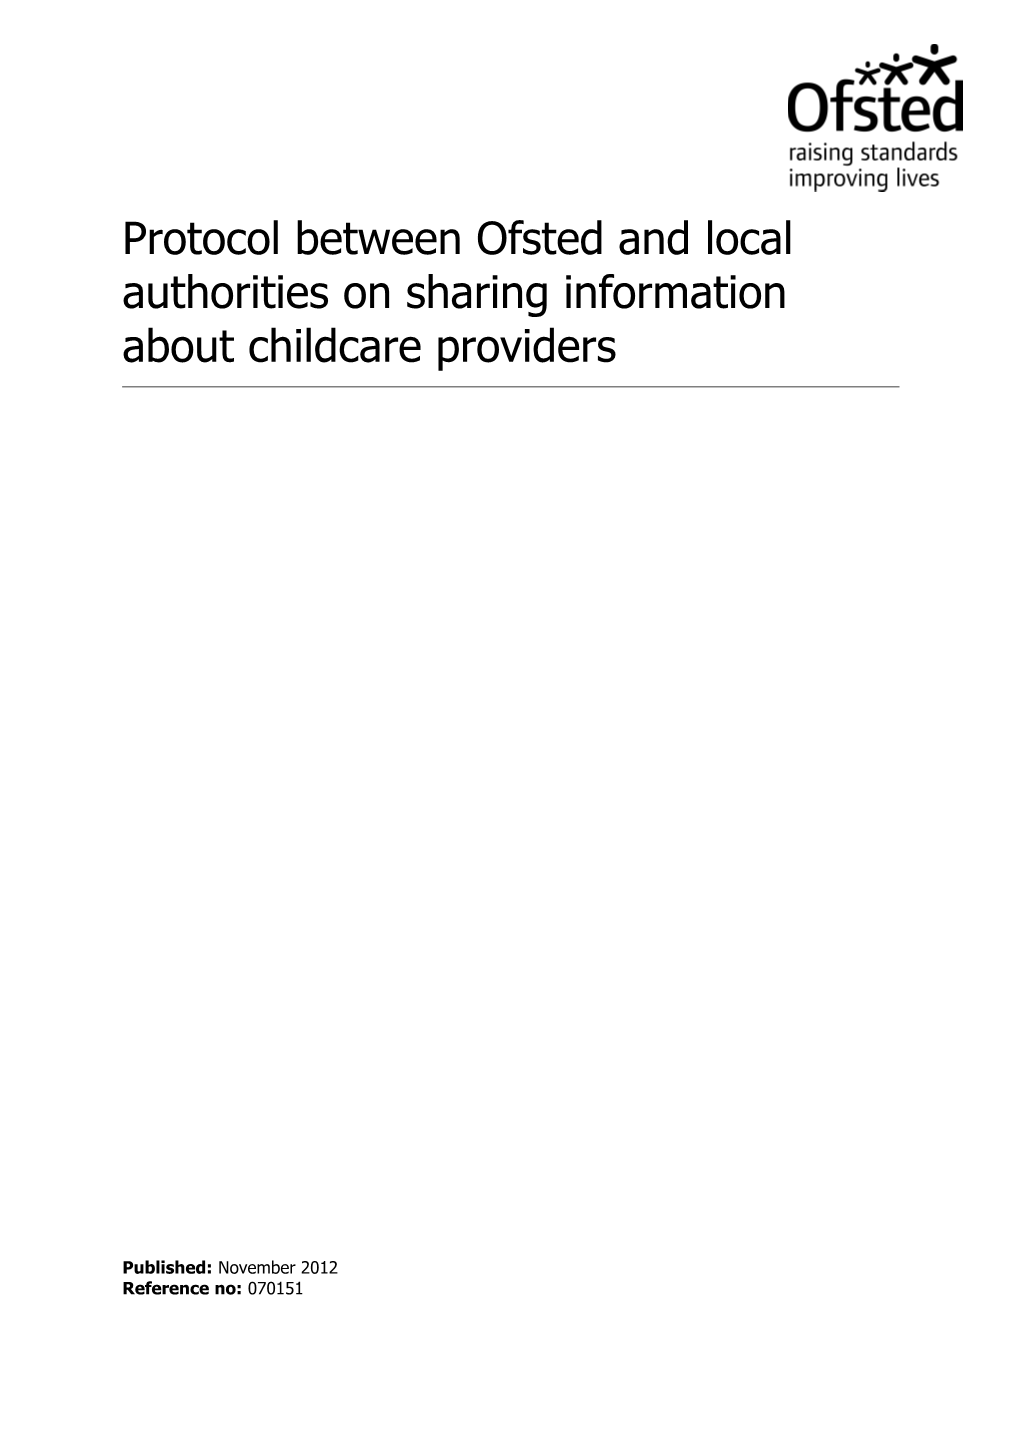 Protocol Between Ofsted and Local Authorities on Sharing Information About Childcare Providers